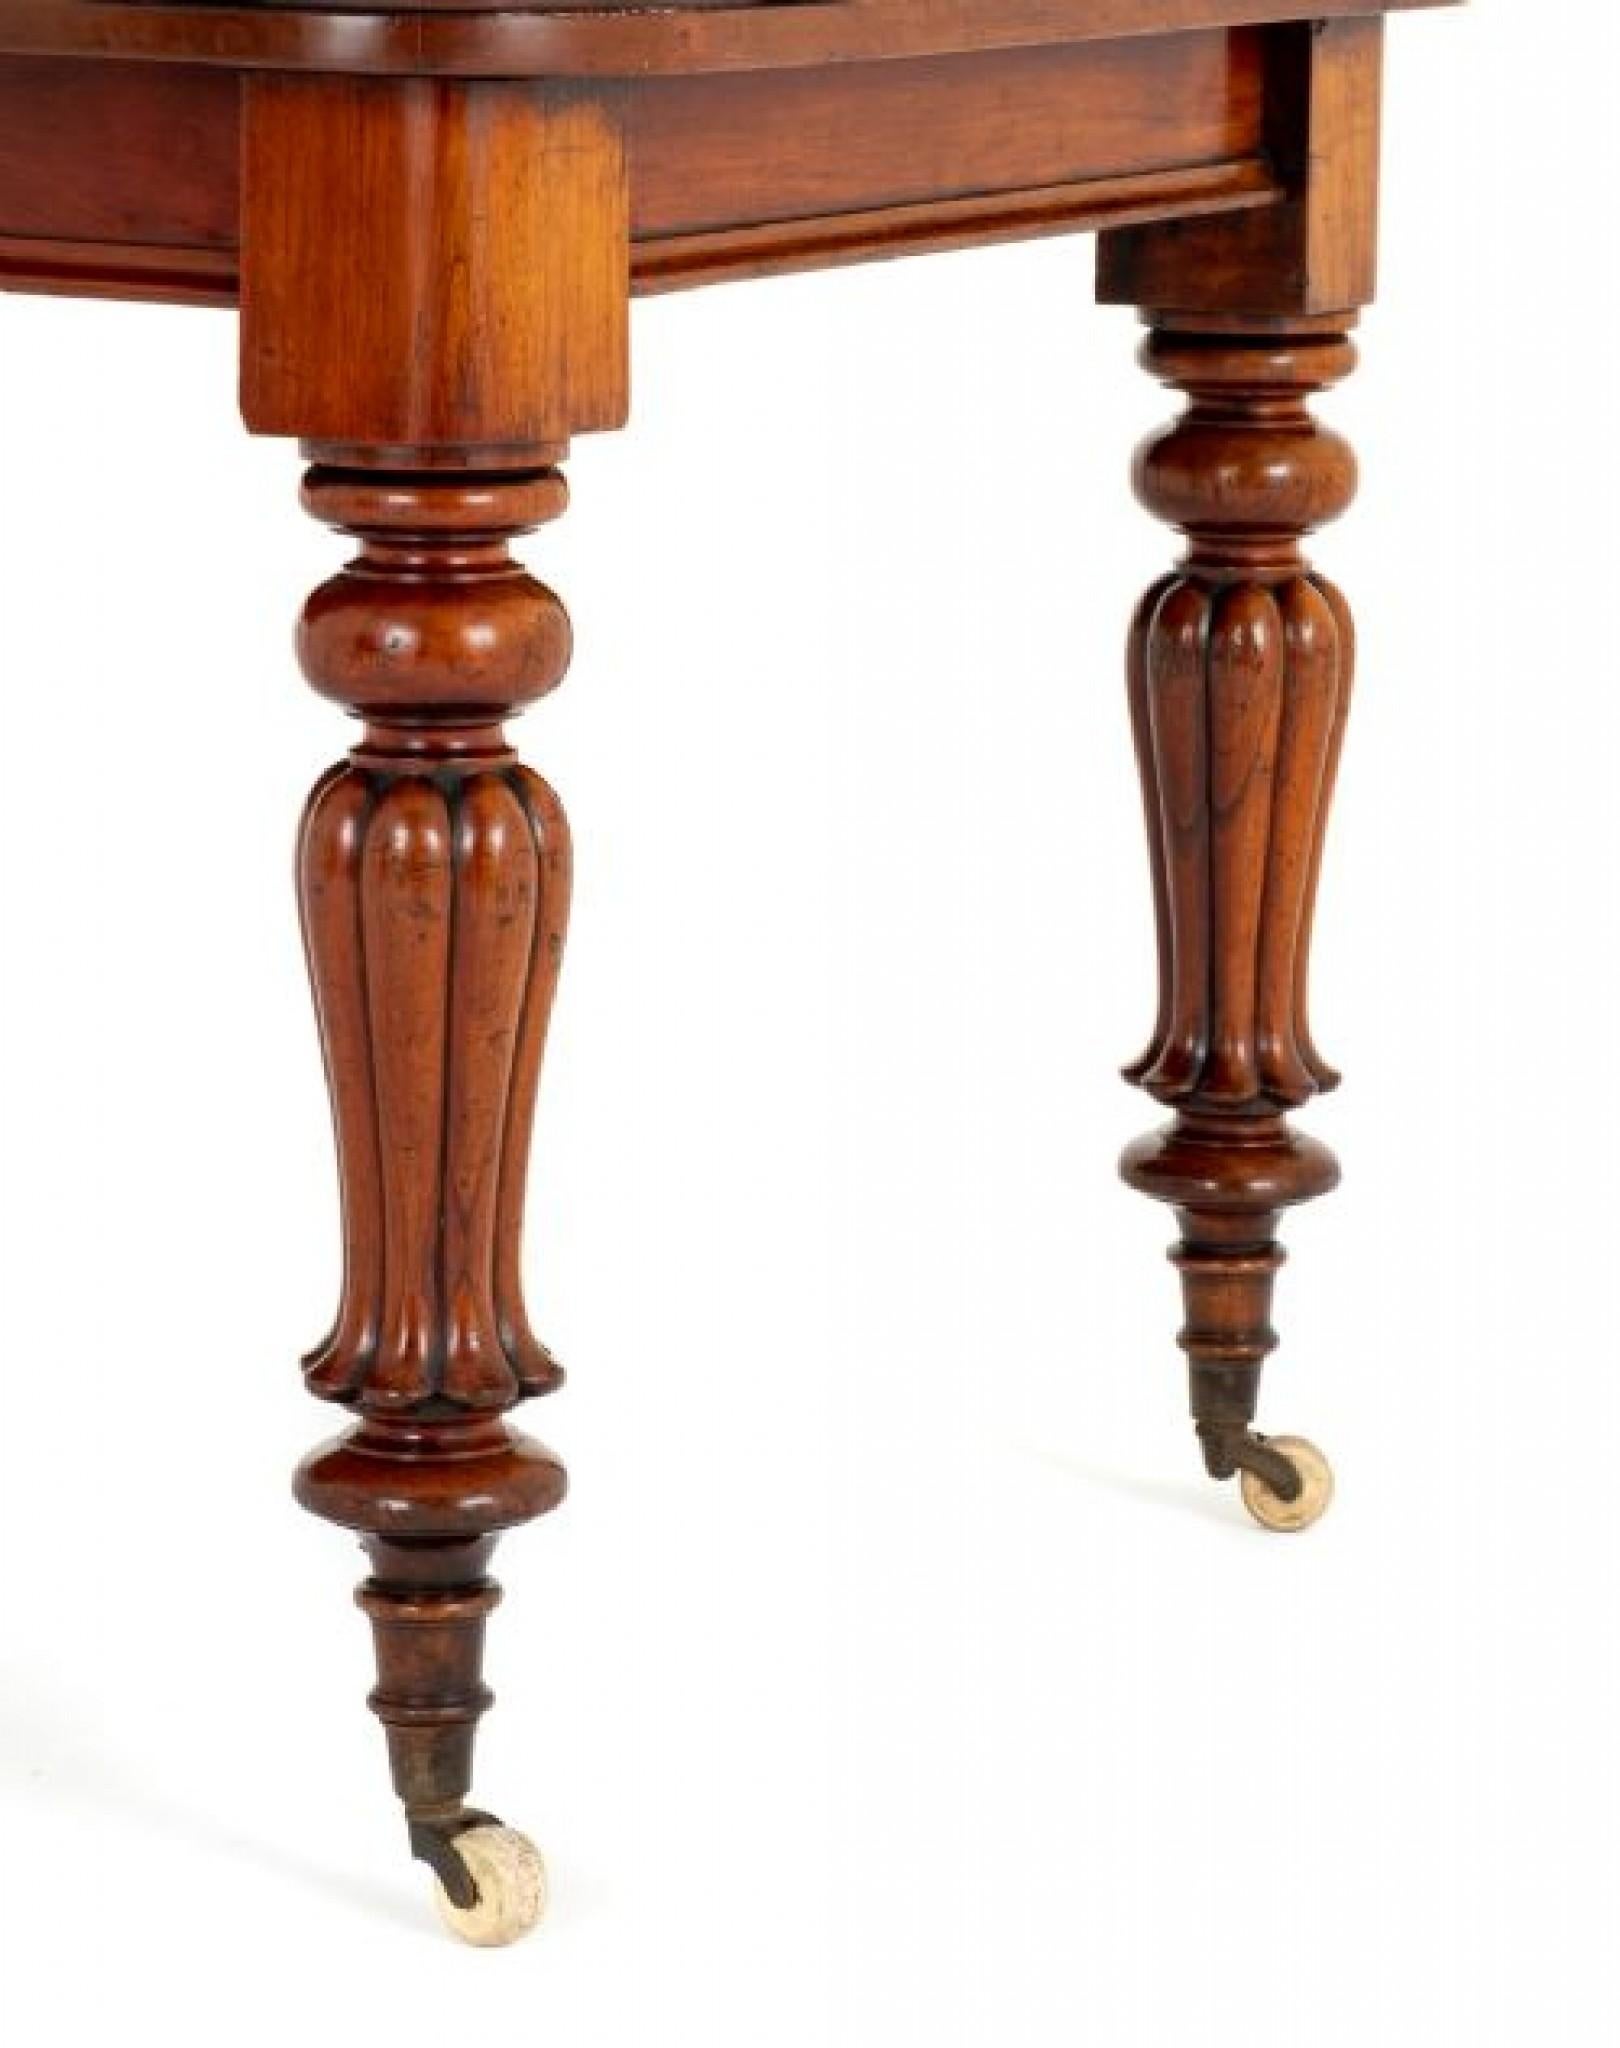 William IV Mahogany Extending Dining Table.
The table stands upon typical William IV turned and fluted legs.
Seating Capacity: The table has the capacity to seat up to 8 people comfortably when fully extended. This makes it suitable for larger